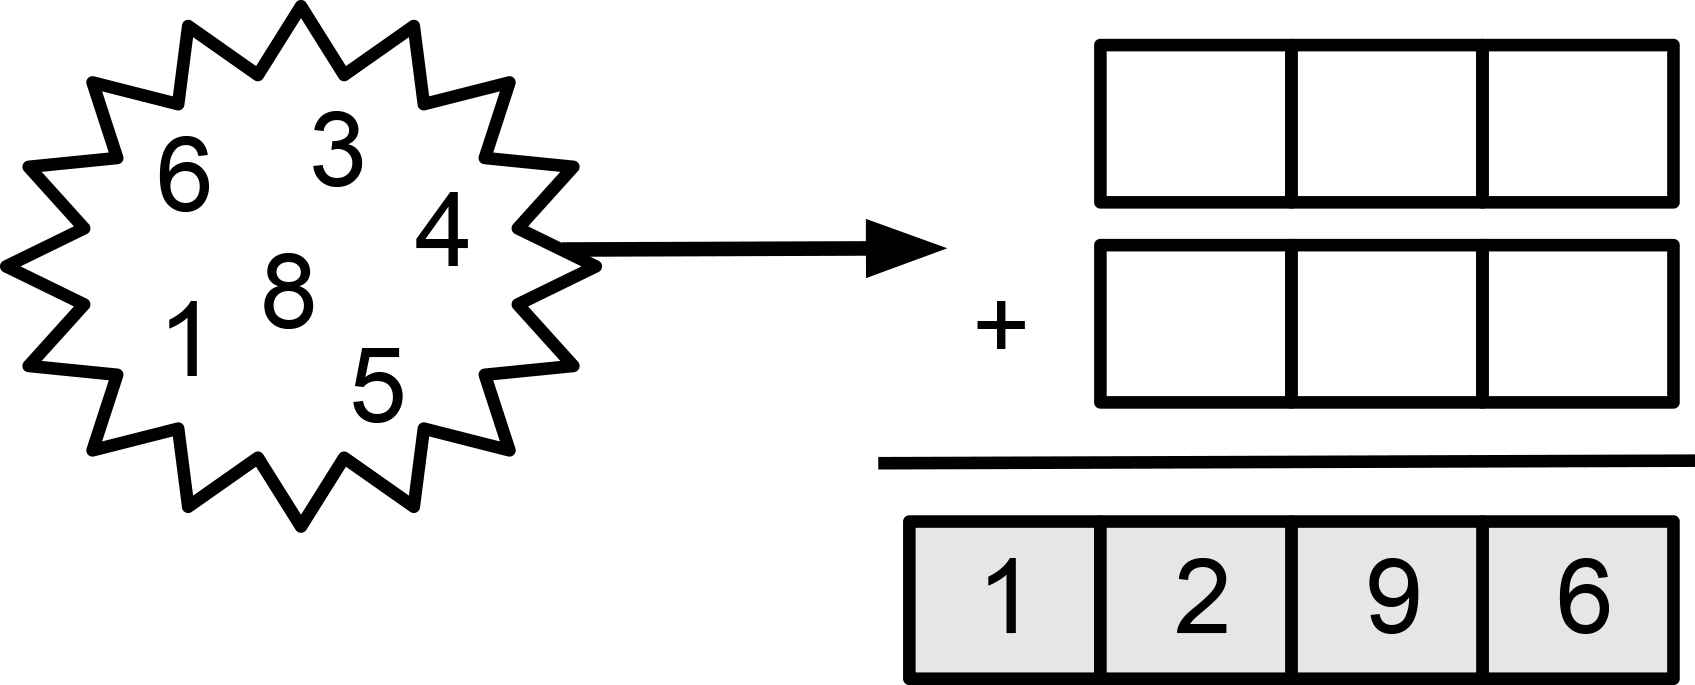 The numbers are 1, 3, 4, 5, 6, and 8. Six white boxes represent the digits of two three-digit numbers. The two three-digit numbers are added and the sum is the four-digit number 1296.